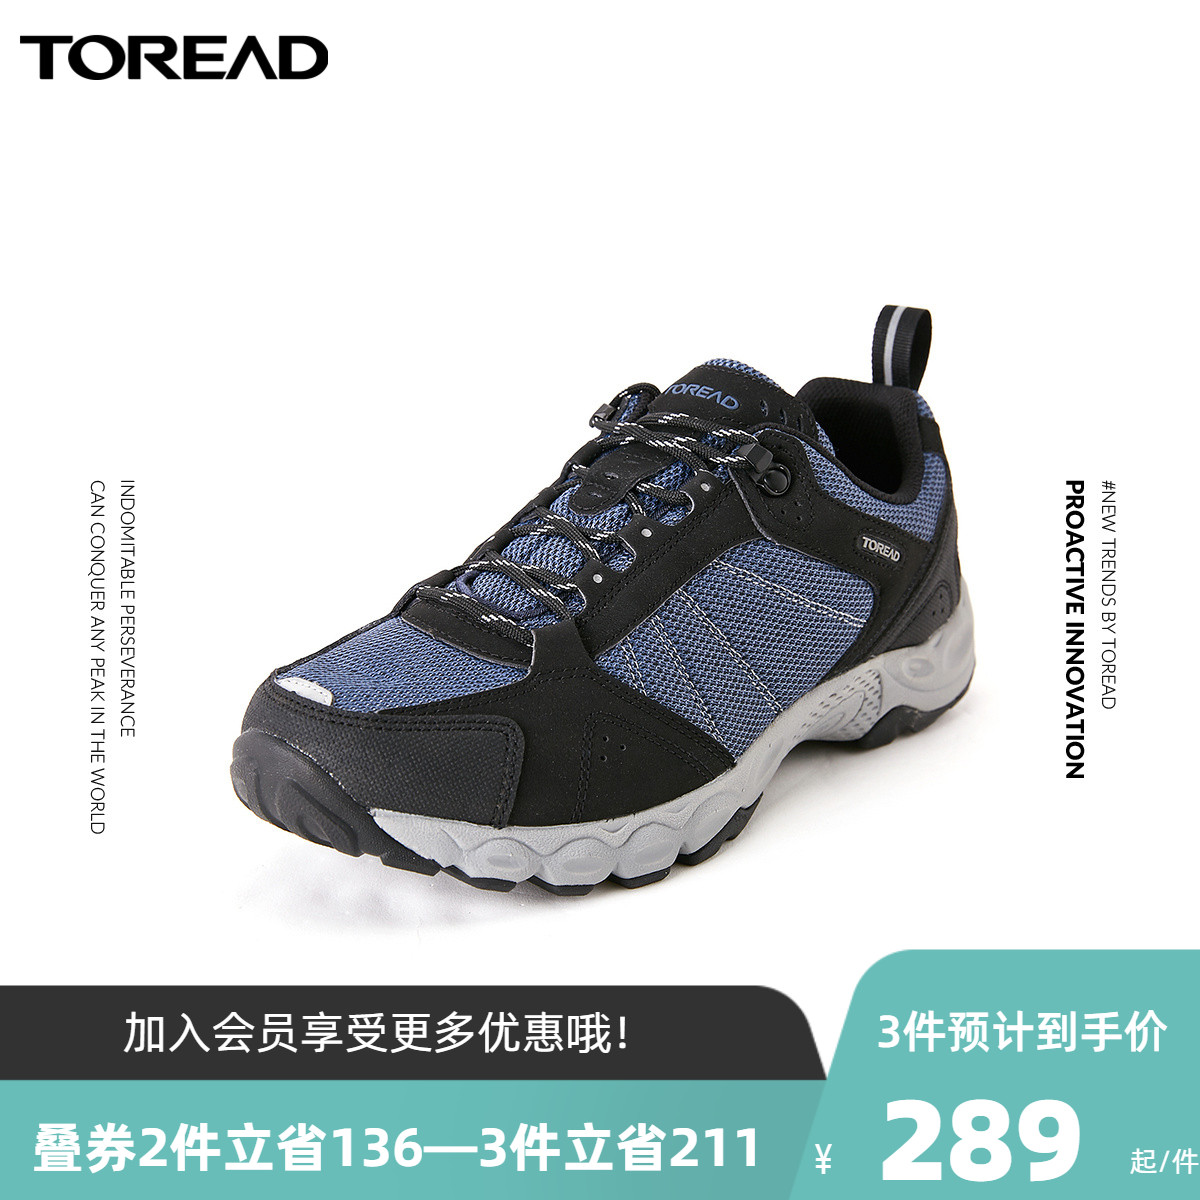 Pathfinder Men's Style Hiking Shoes 20 Autumn Winter New Outdoor Breathable Anti-Slip Light Casual Shoes Abrasion Resistant Sport